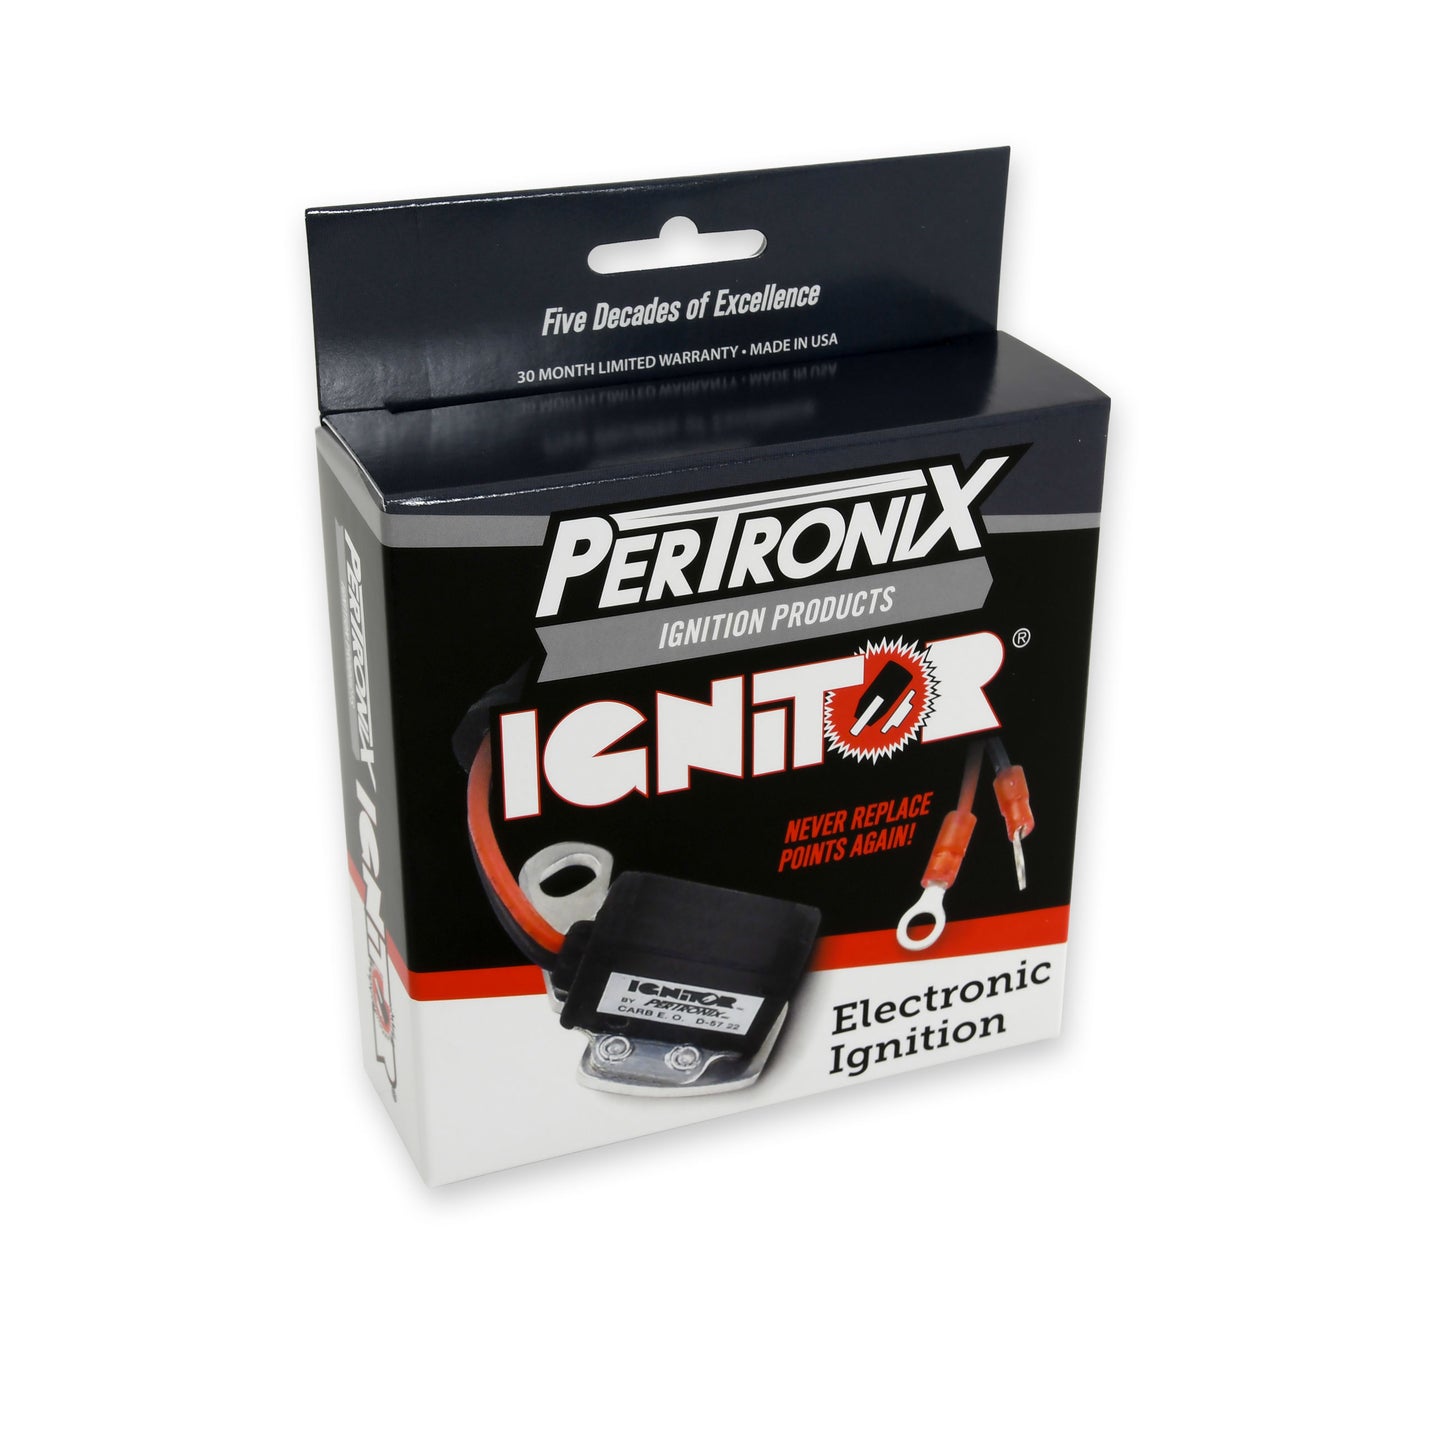 PerTronix Ignitor Electronic Ignition Conversion Kit-1885-package